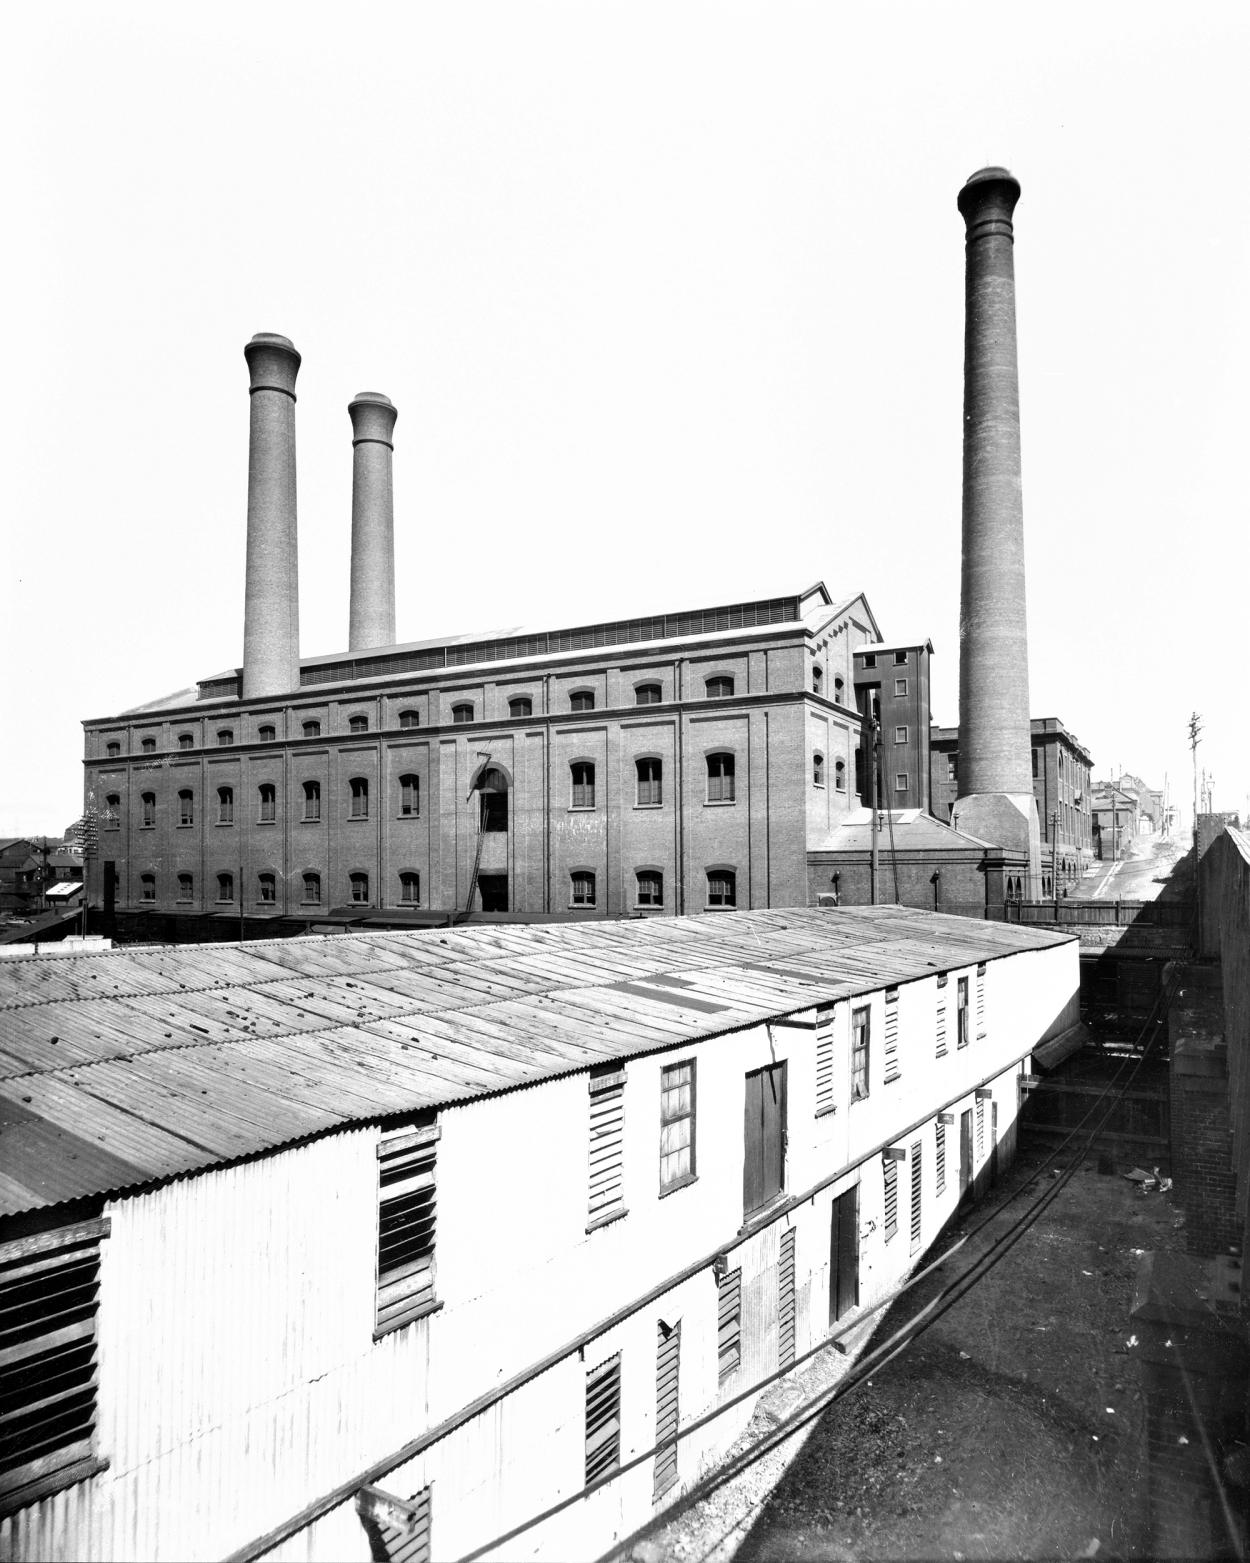 Black and white photograph of large brick Boiler Hall with three chimenys